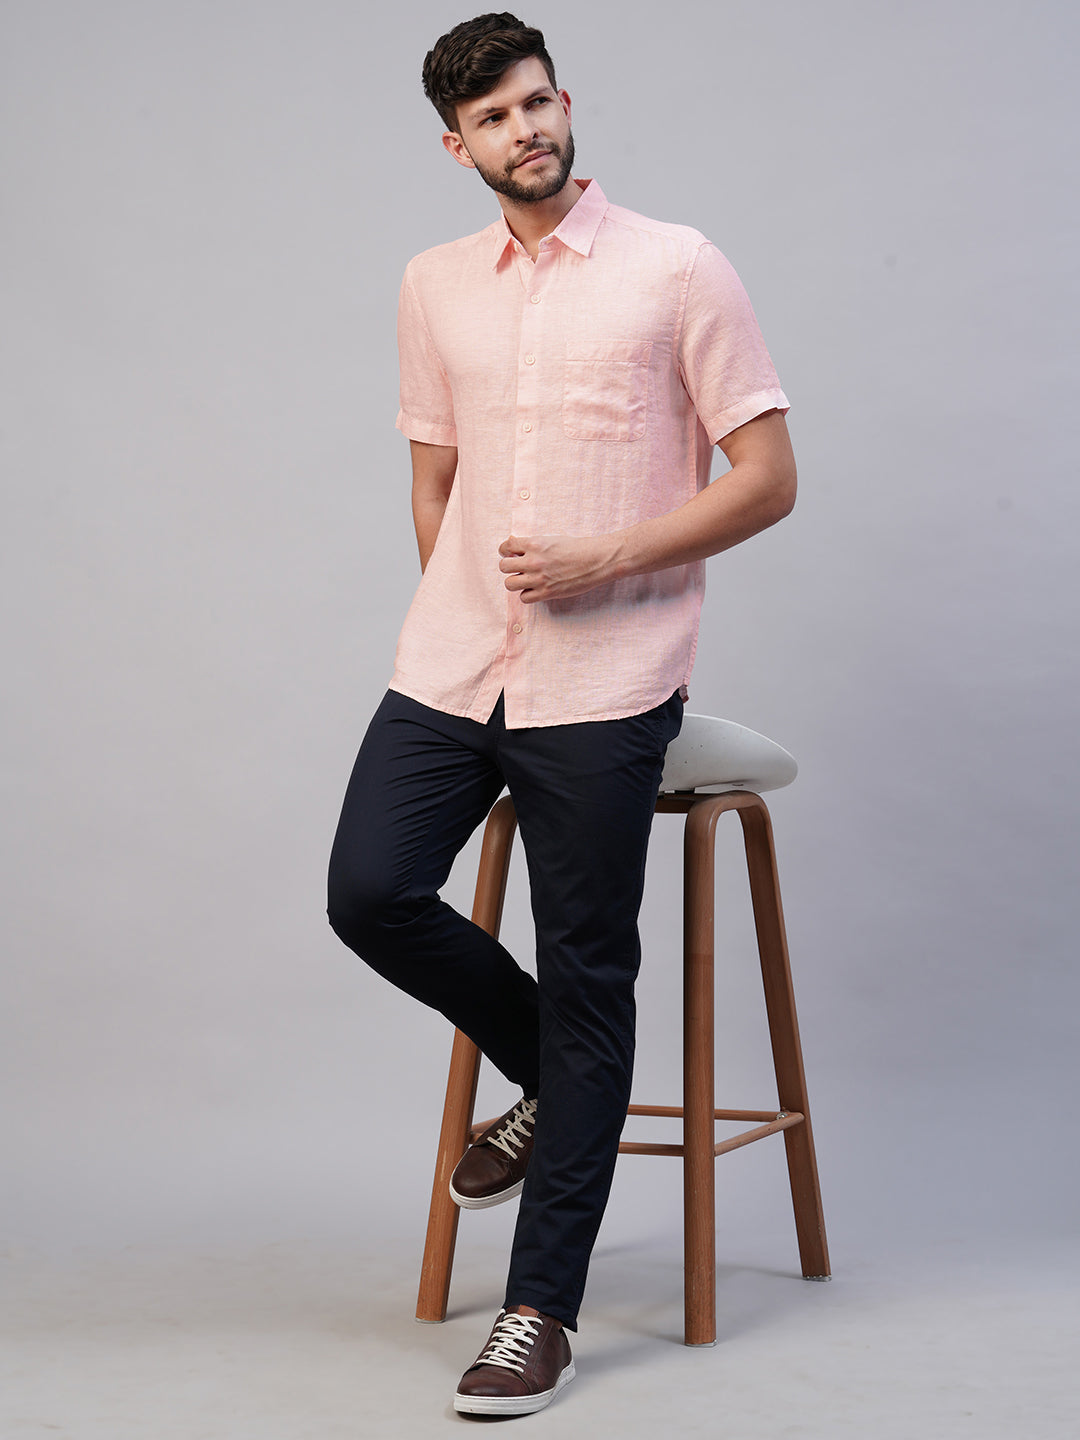 Buy the latest shirts for Men Online  Levis India